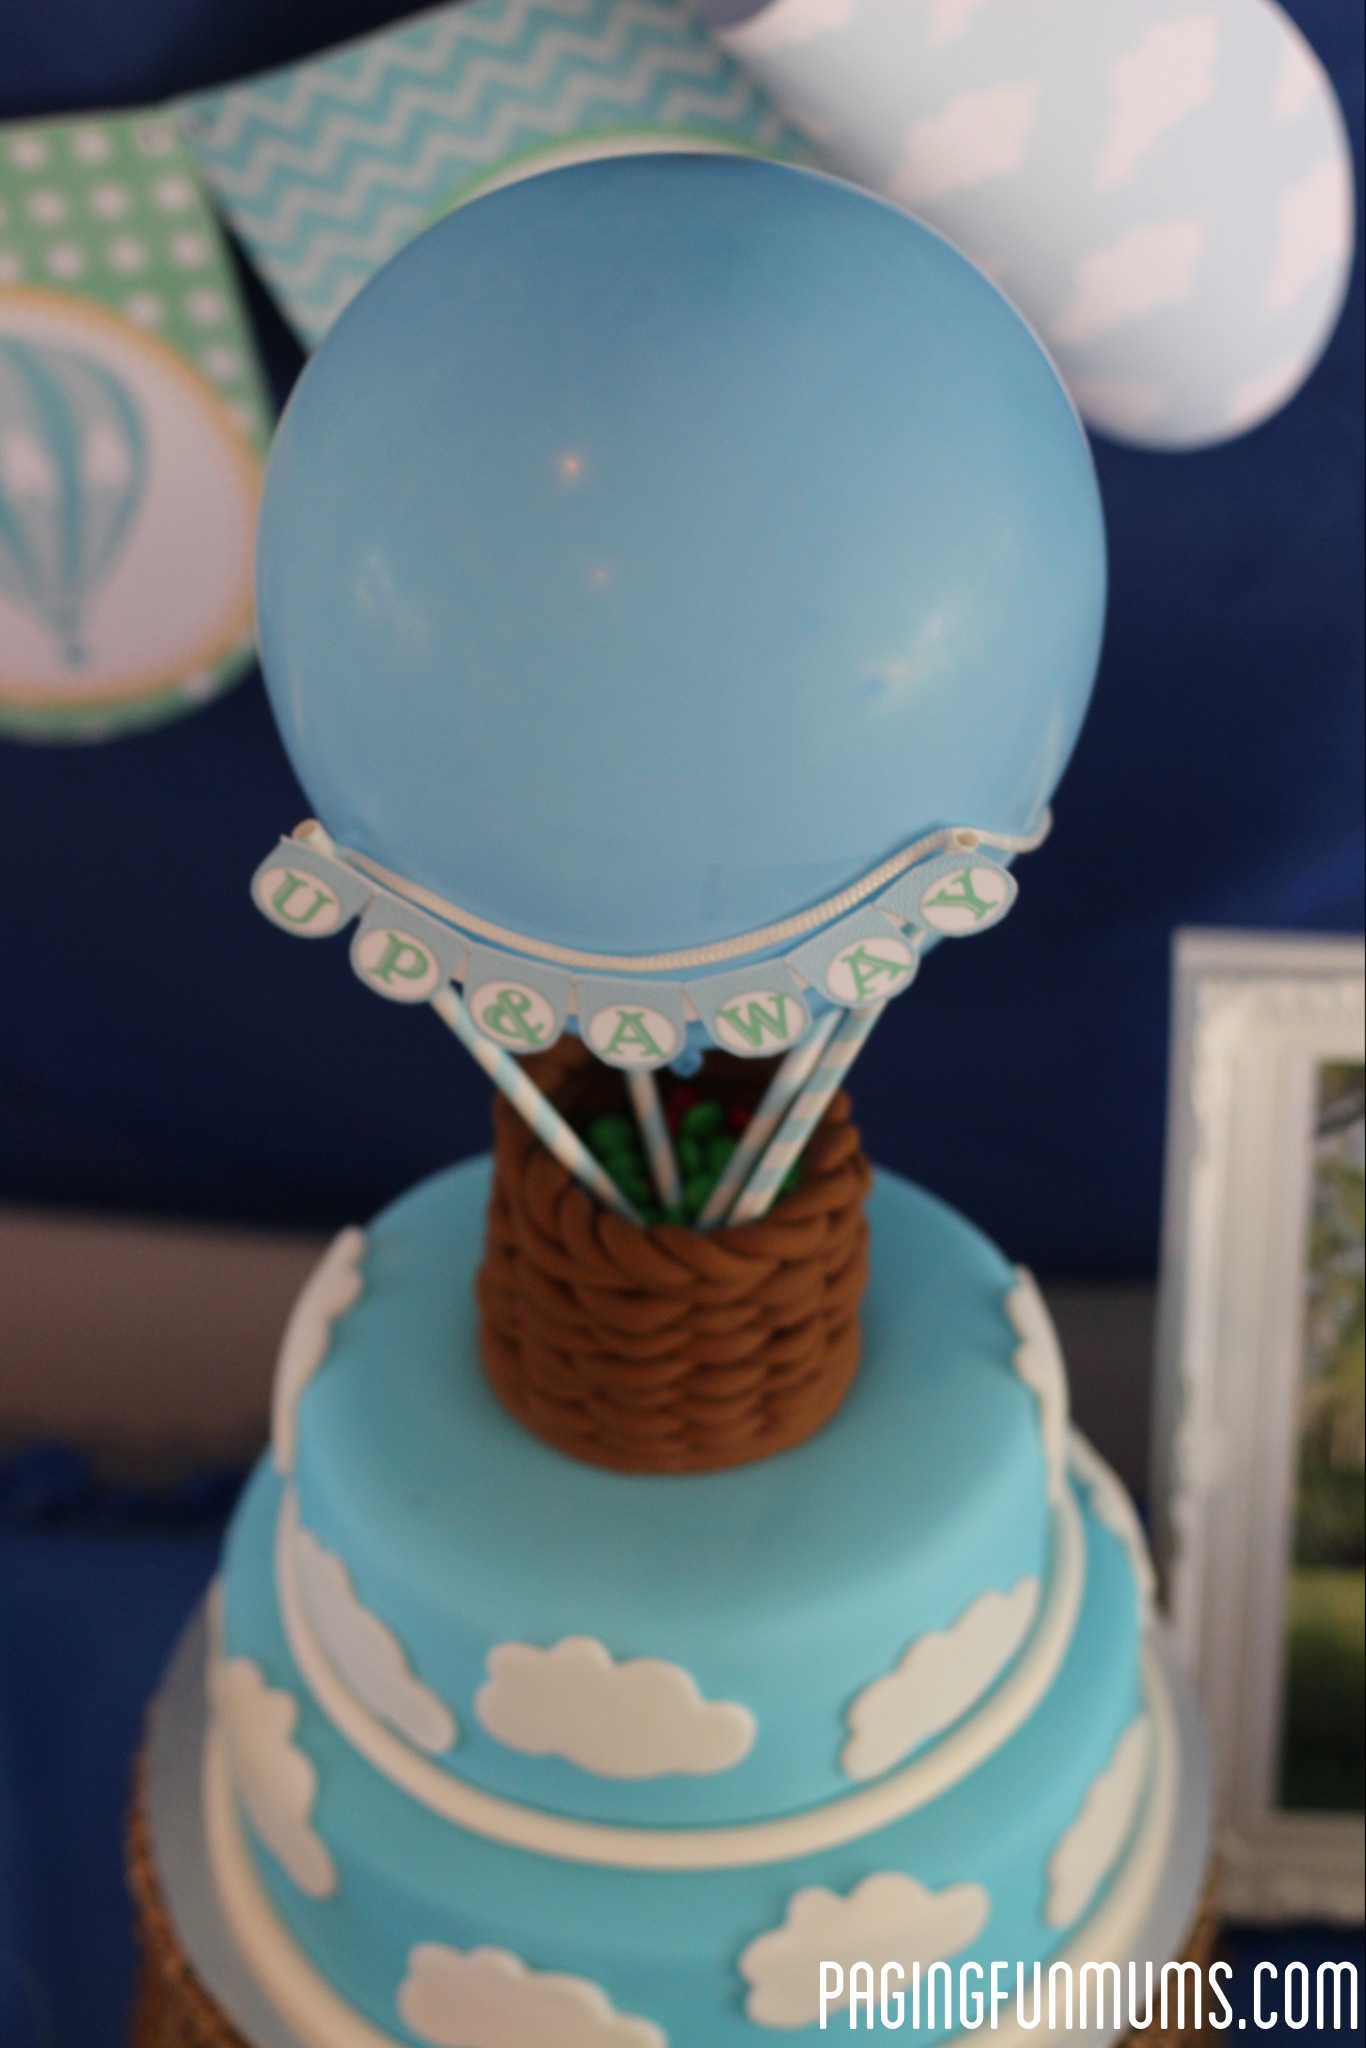 Pastel Pink & Blue Balloon Cake Topper – A Little Whimsy